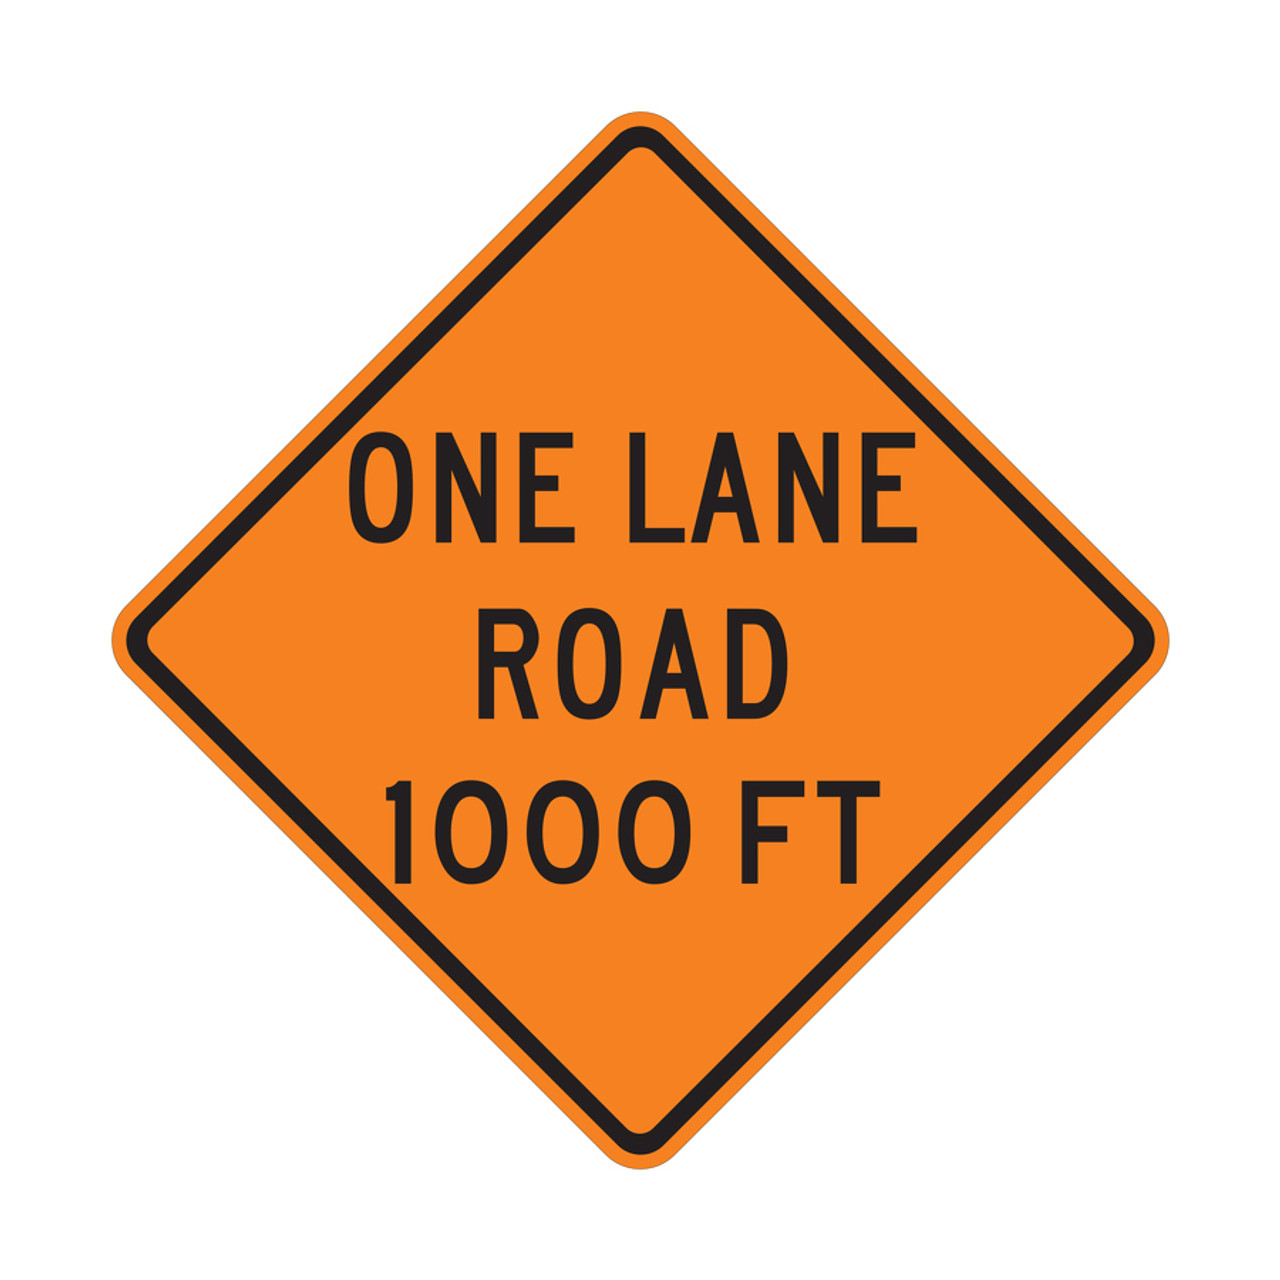 ONE LANE ROAD 1000 FT Sign W20-4